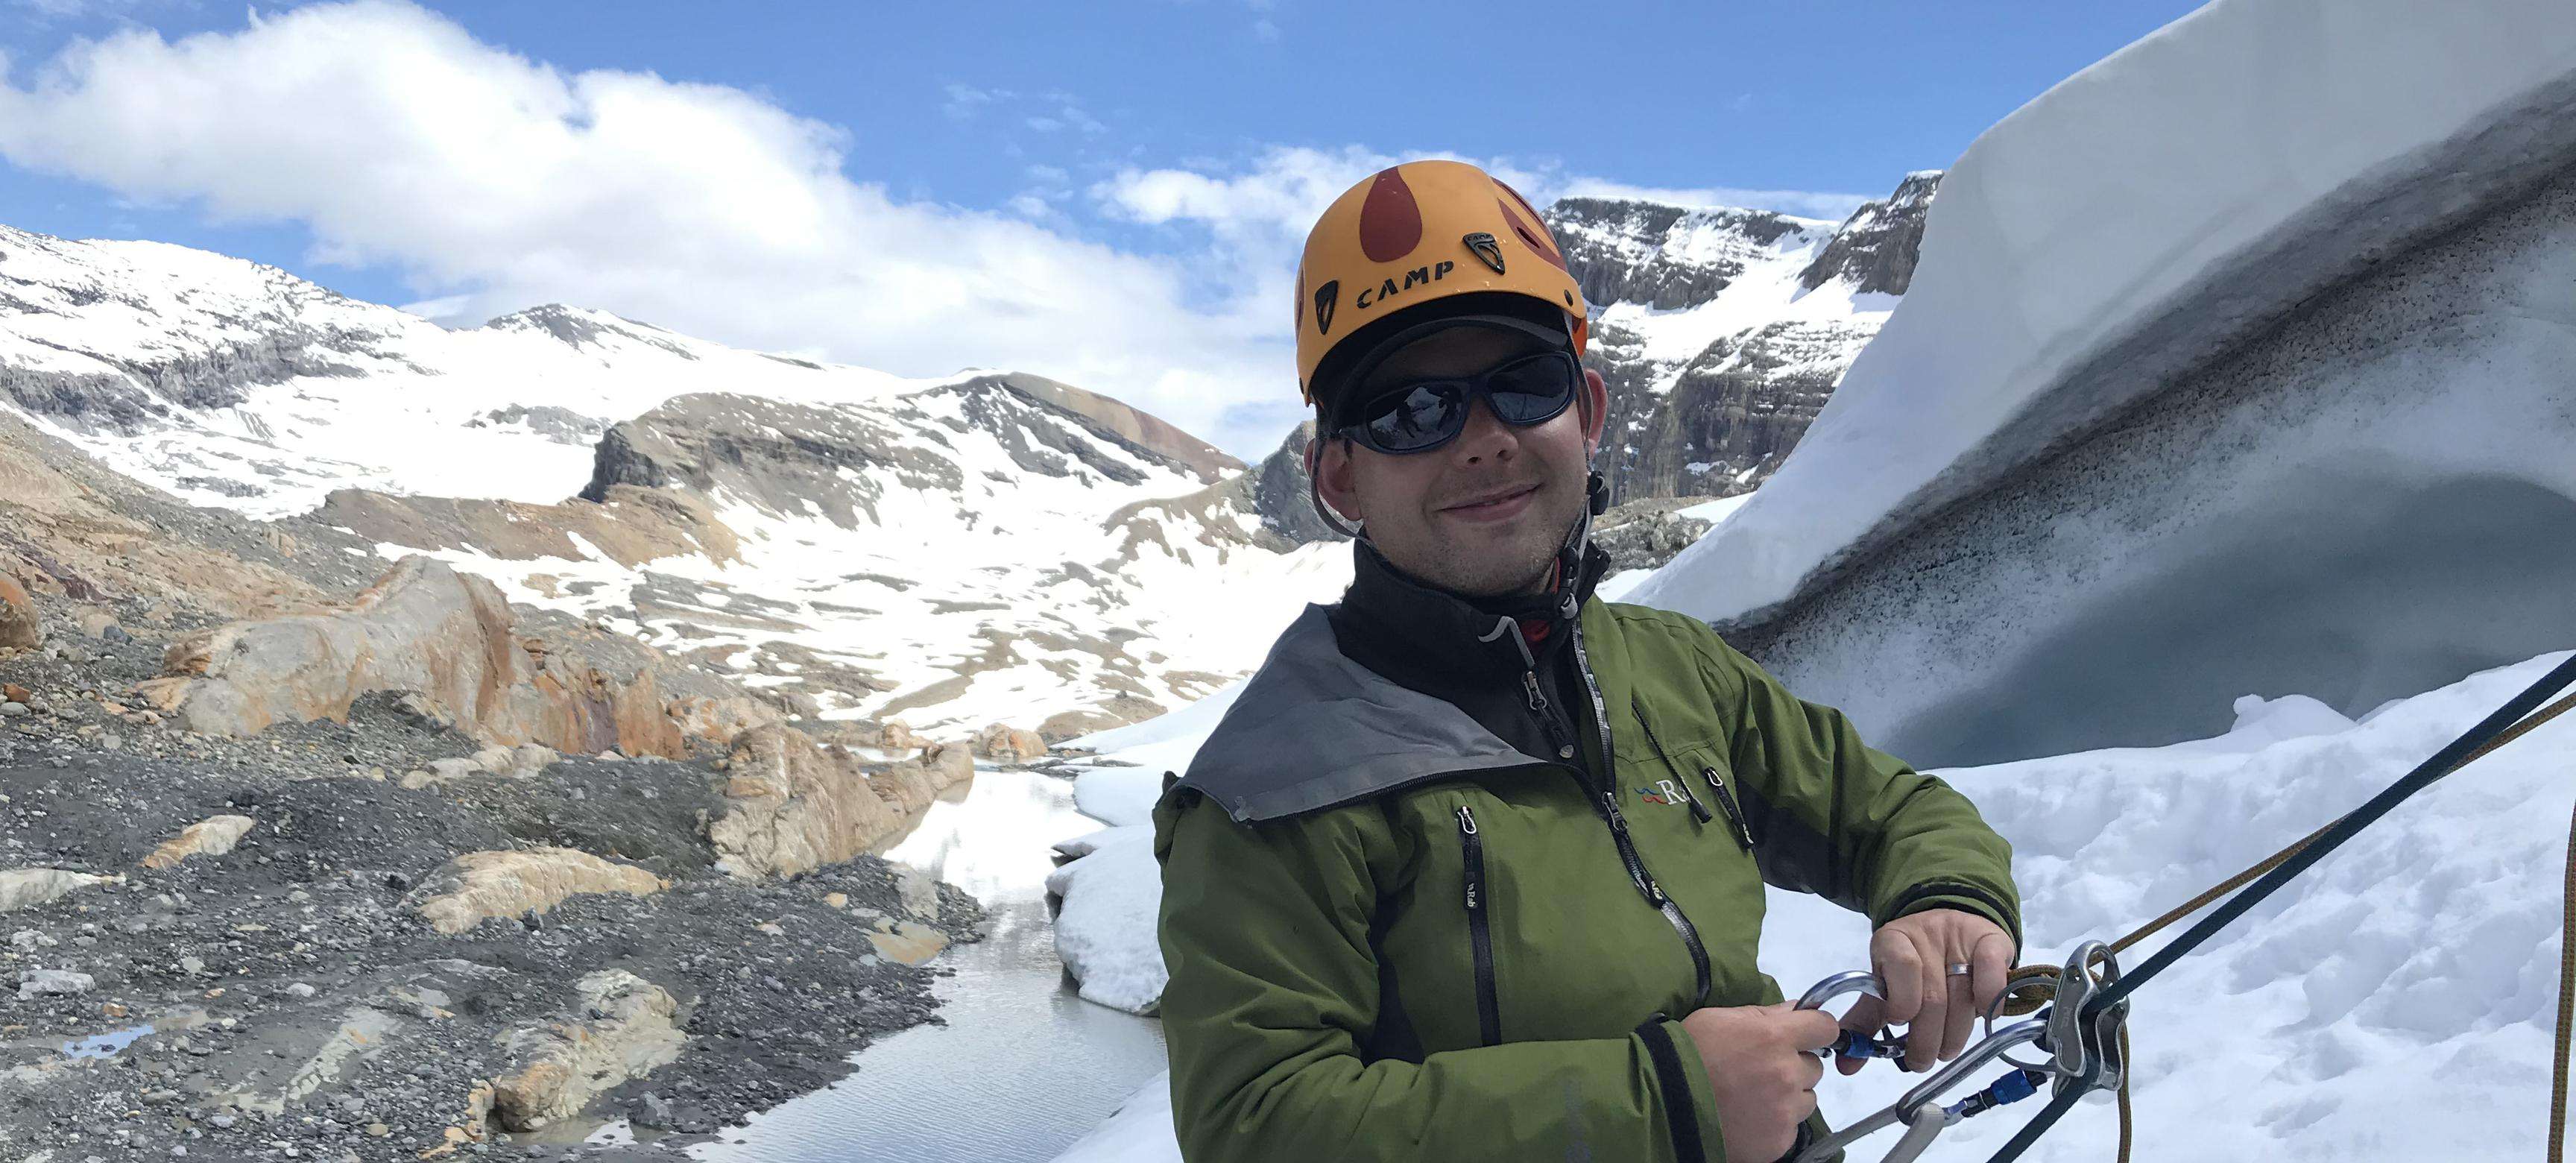 Man with sunglasses smiles at camera while climbing in Rocky Mountains.